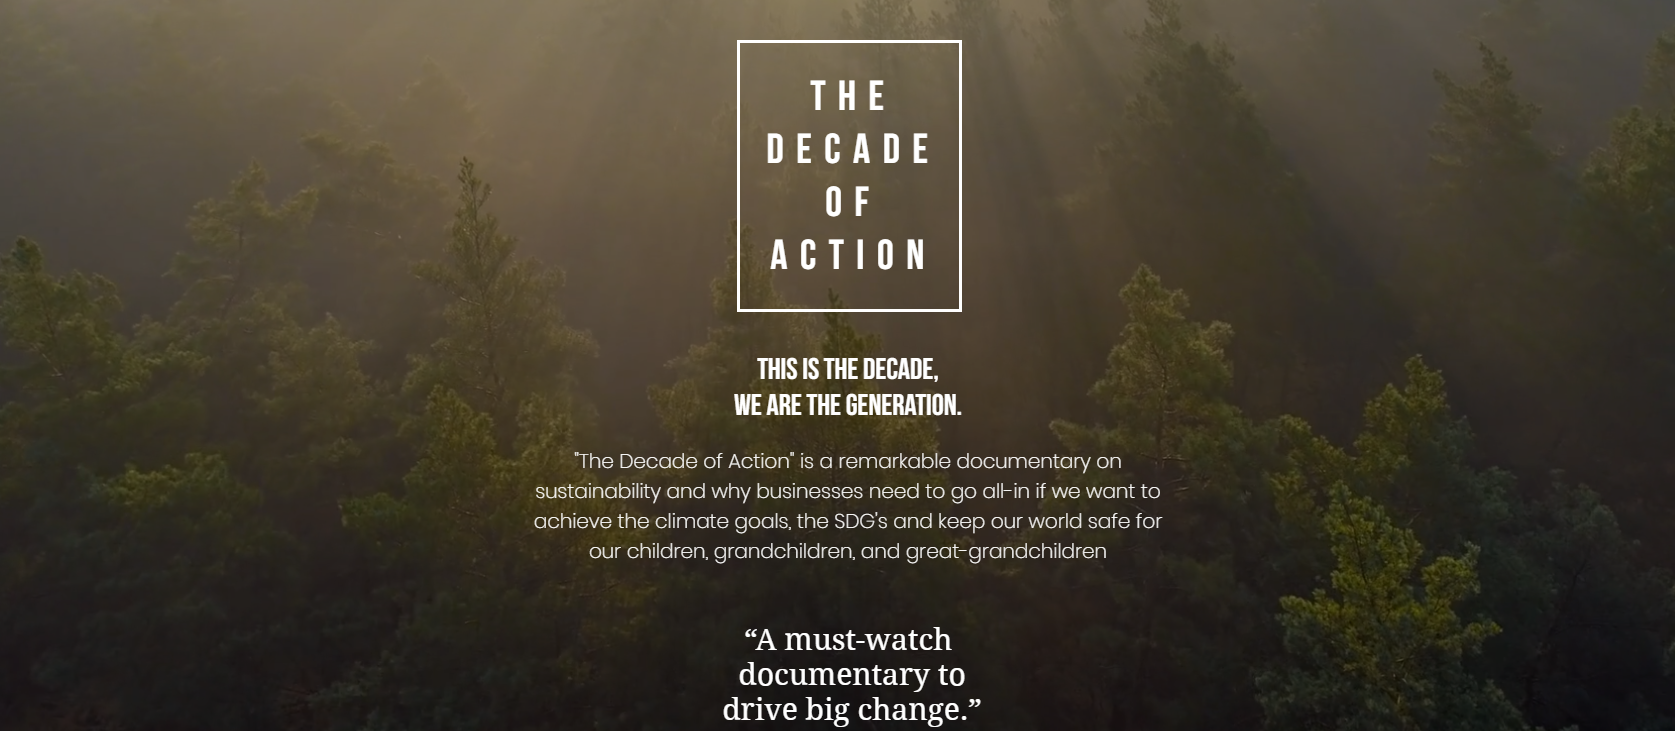 The decade of action